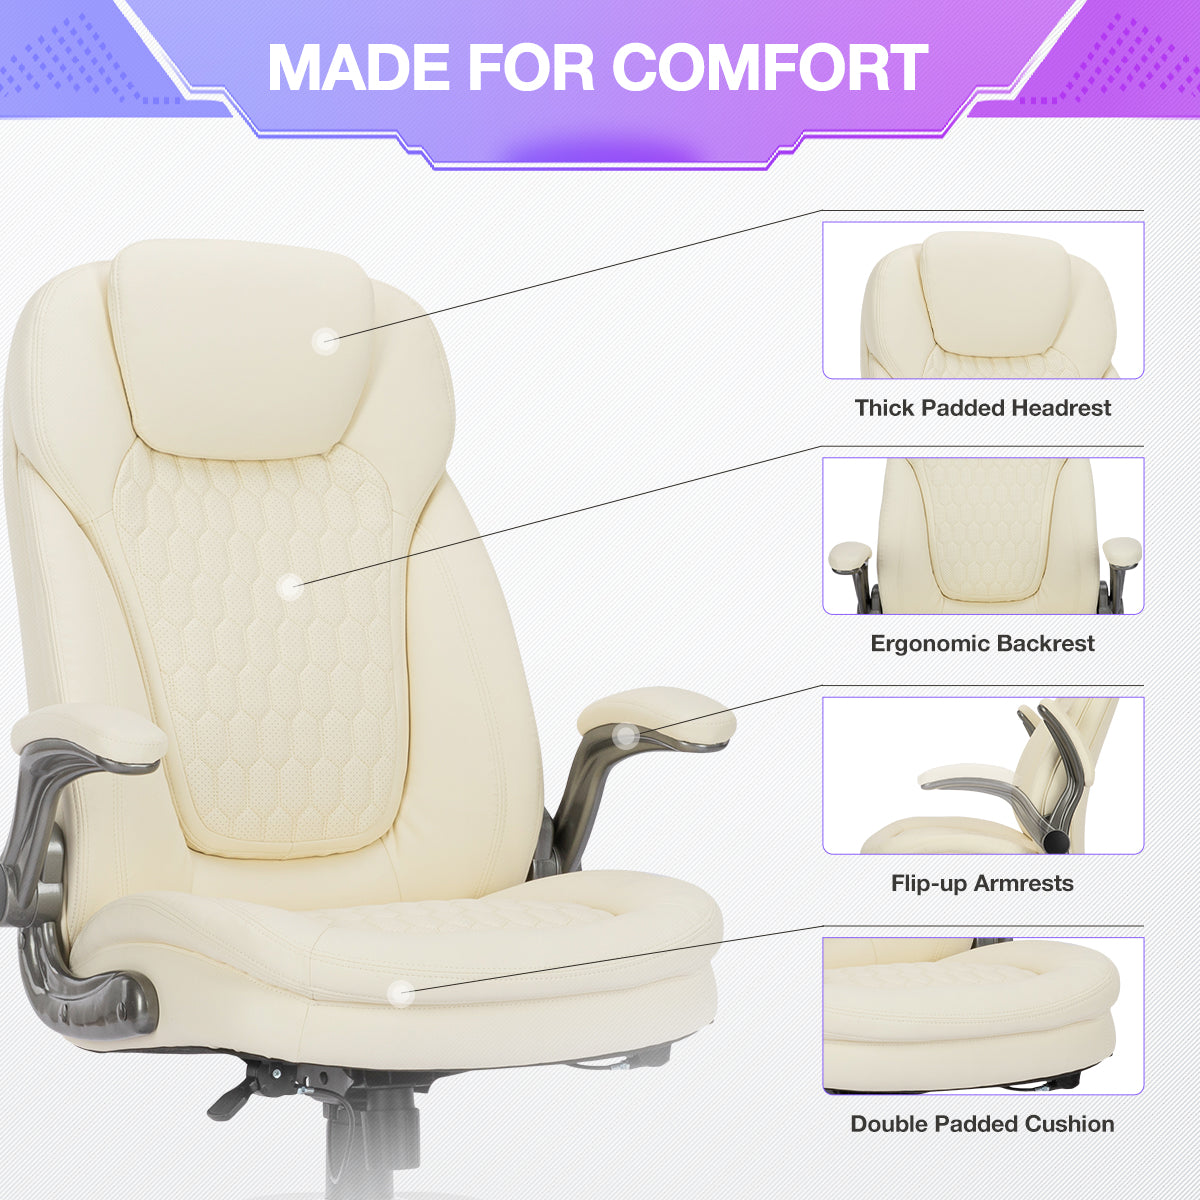 COLAMY Beige Color Ergonomic High Back Office Chair Thickened Headrest & Cushion Model.6686